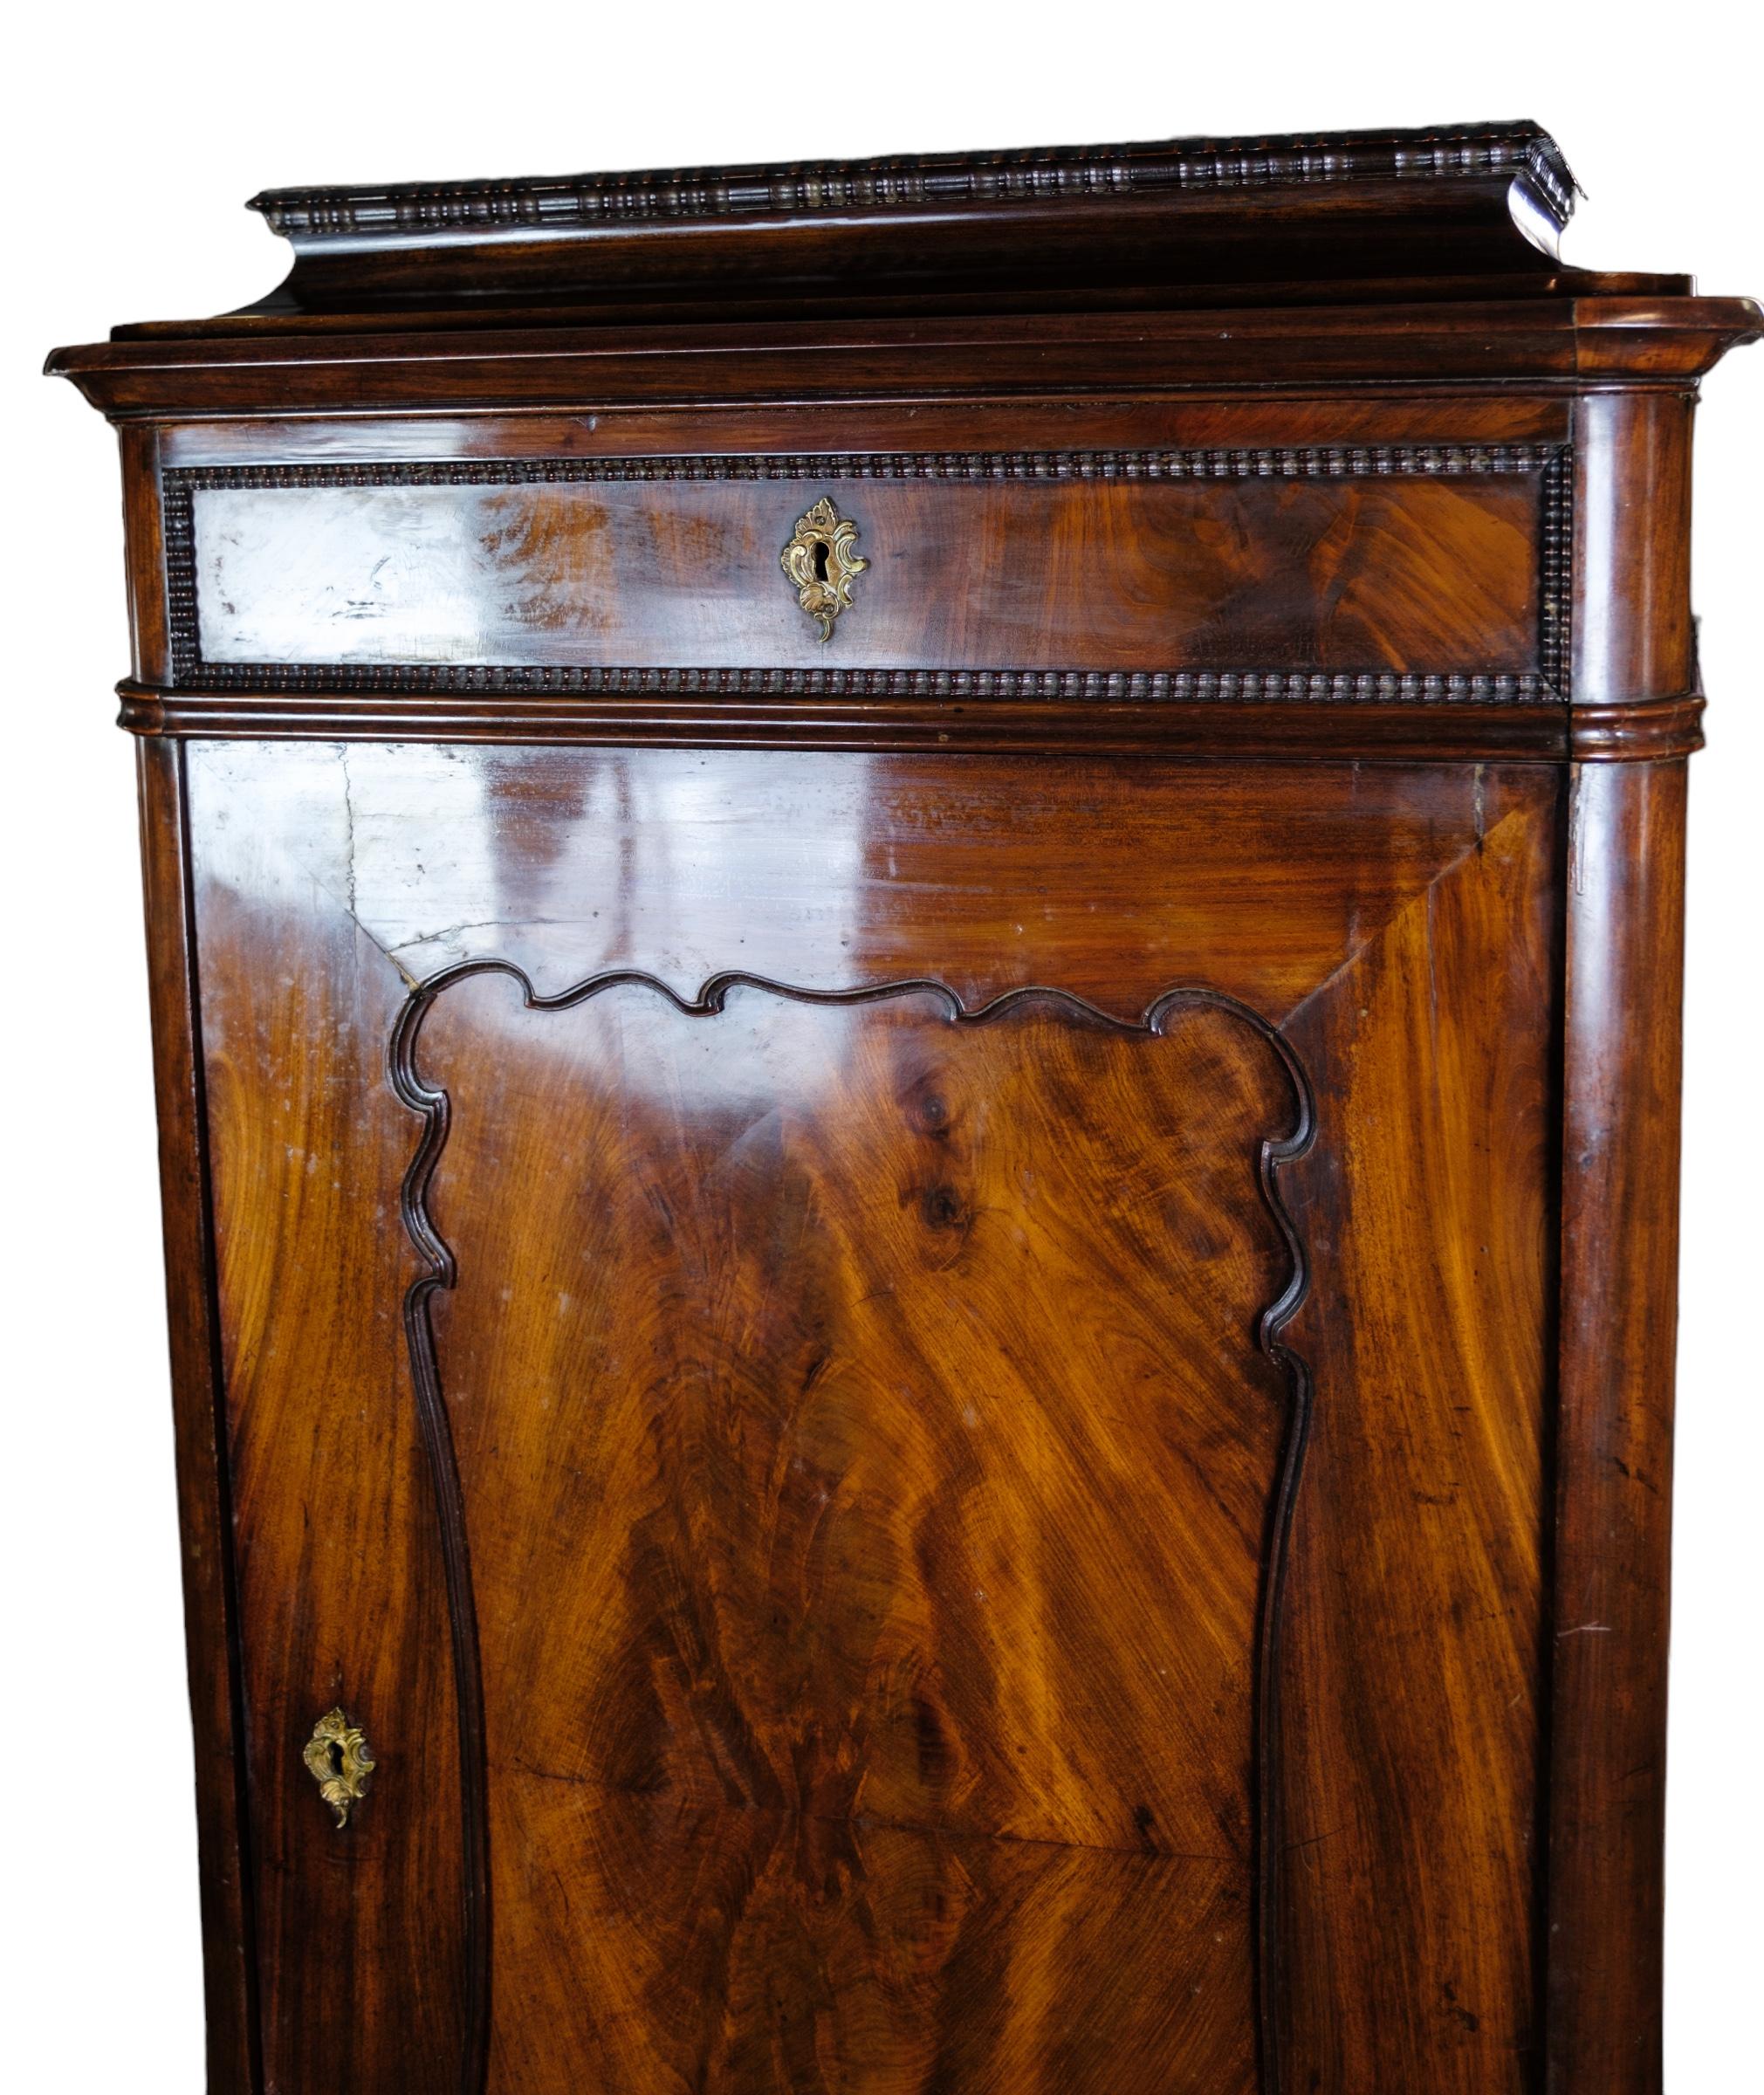 Danish Tall Cabinet in Polished Mahogany from the 1850s For Sale